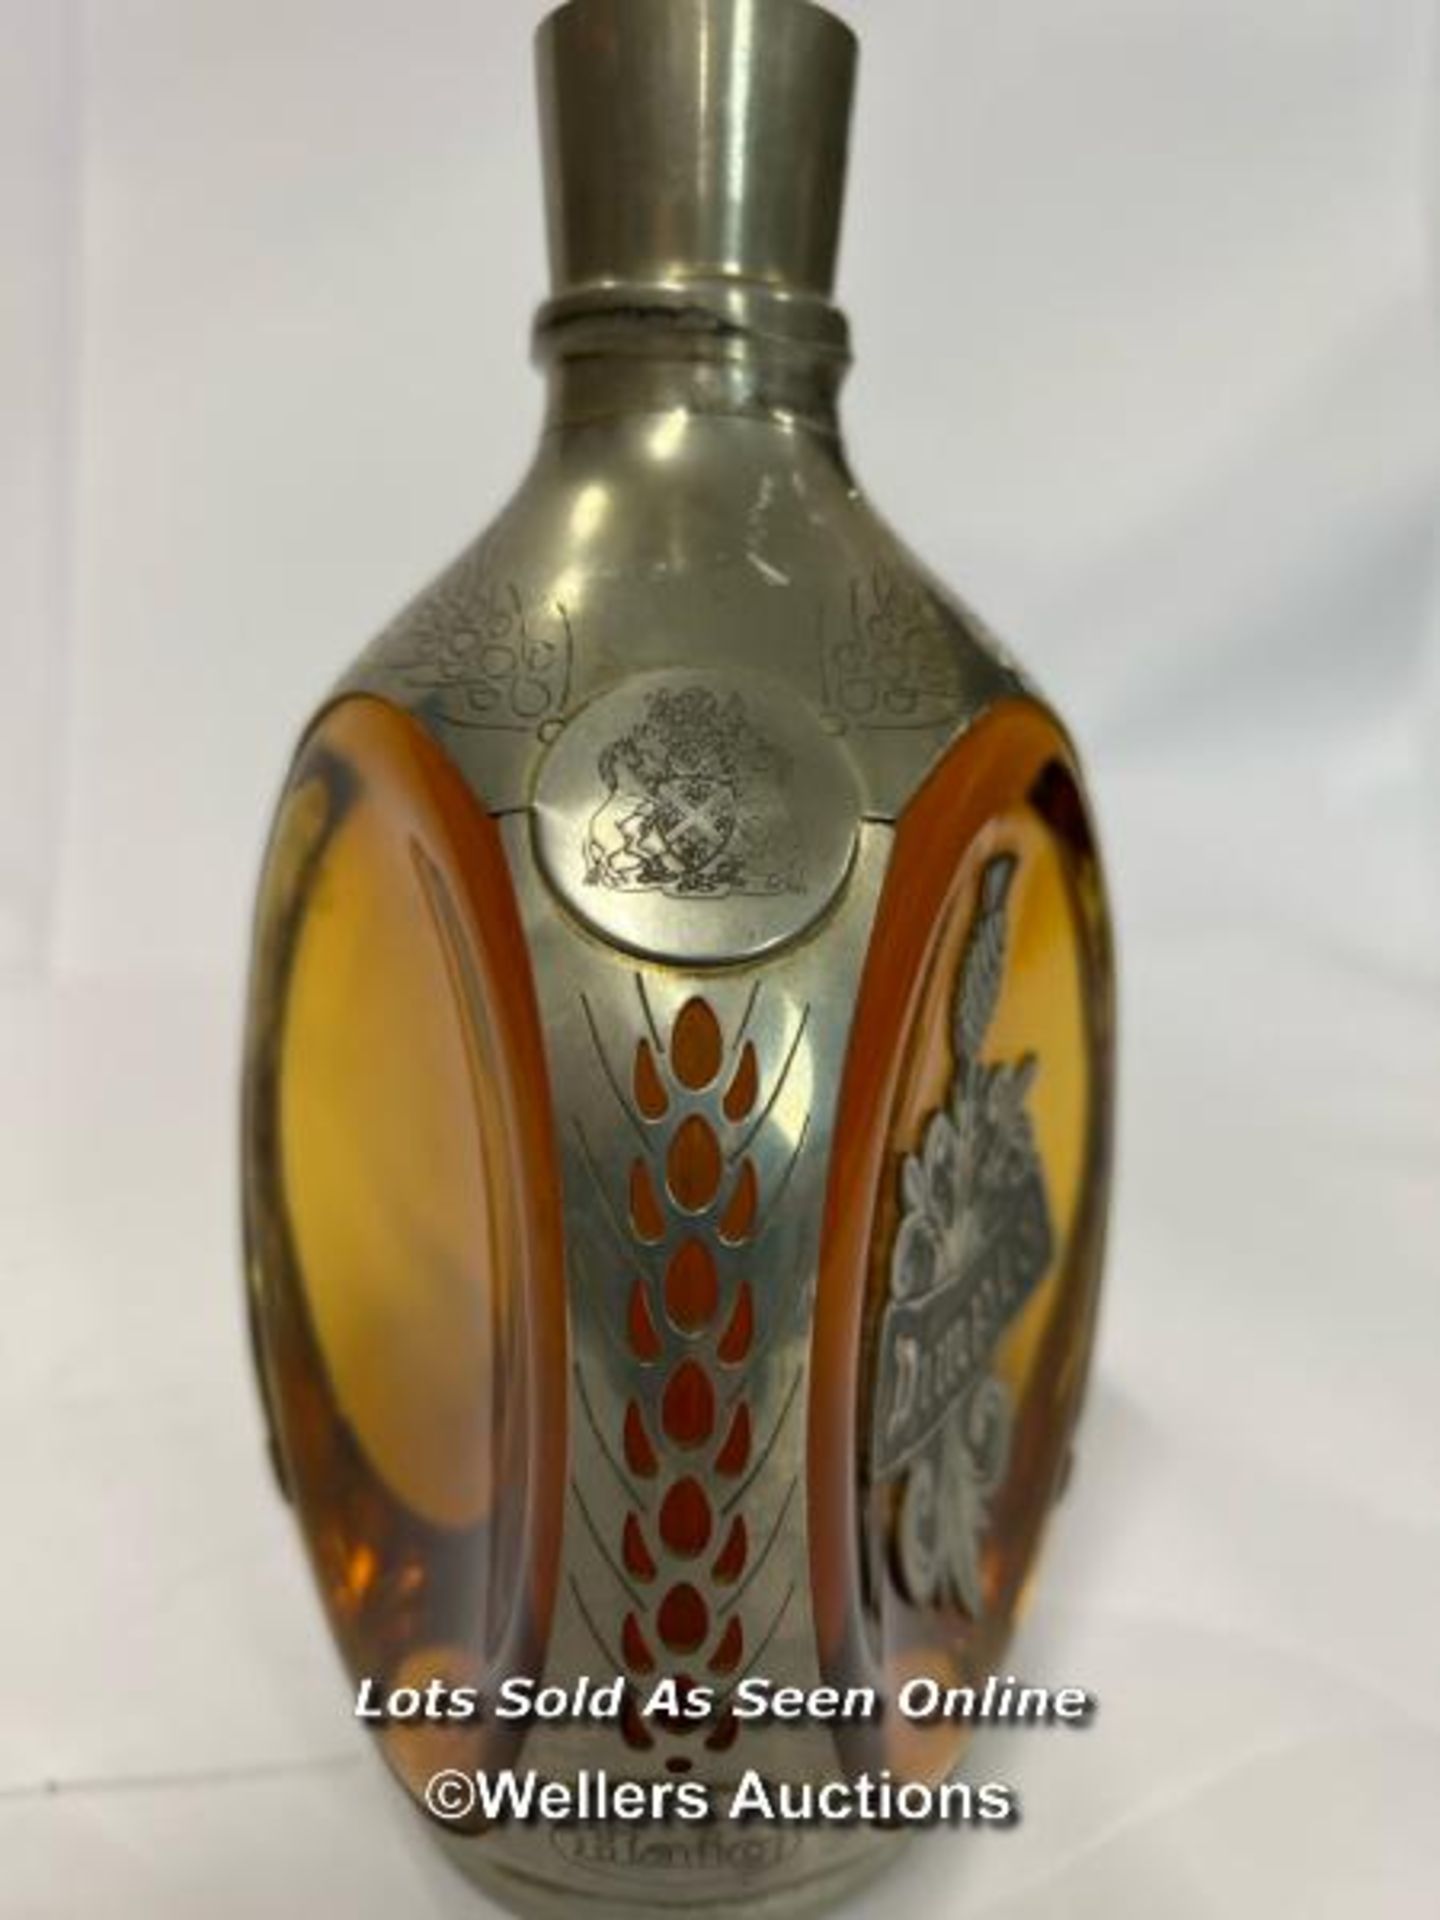 Dimple Haig 12yr whisky in decorative pewter bottle (opened) with a bottle of Dimple 15yr whisky, - Image 3 of 5